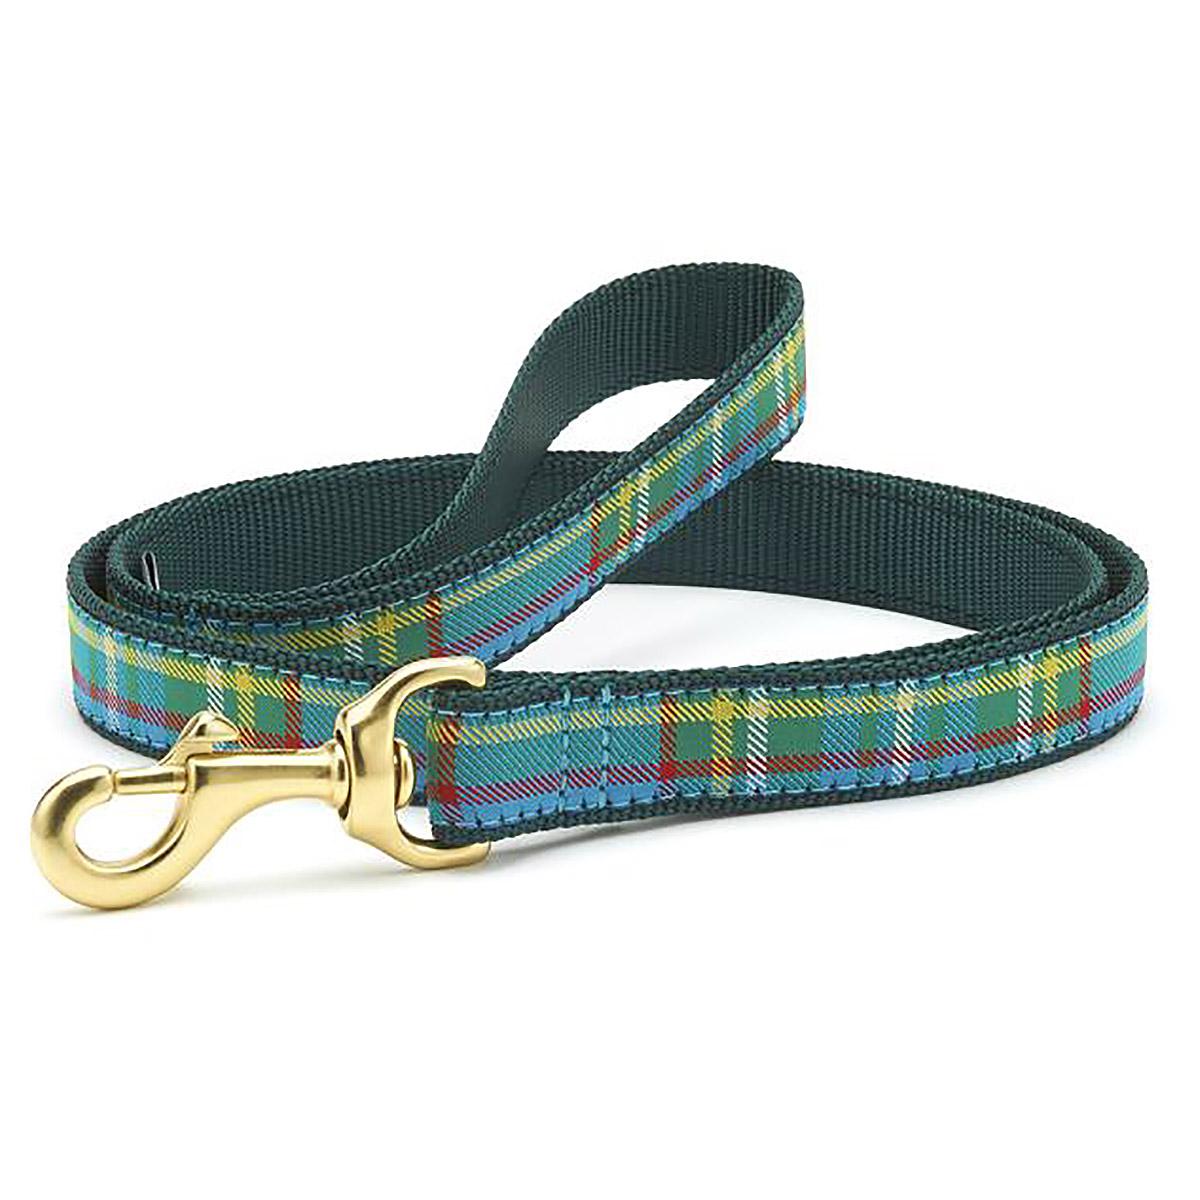 Kendall Plaid Dog Leash by Up Country